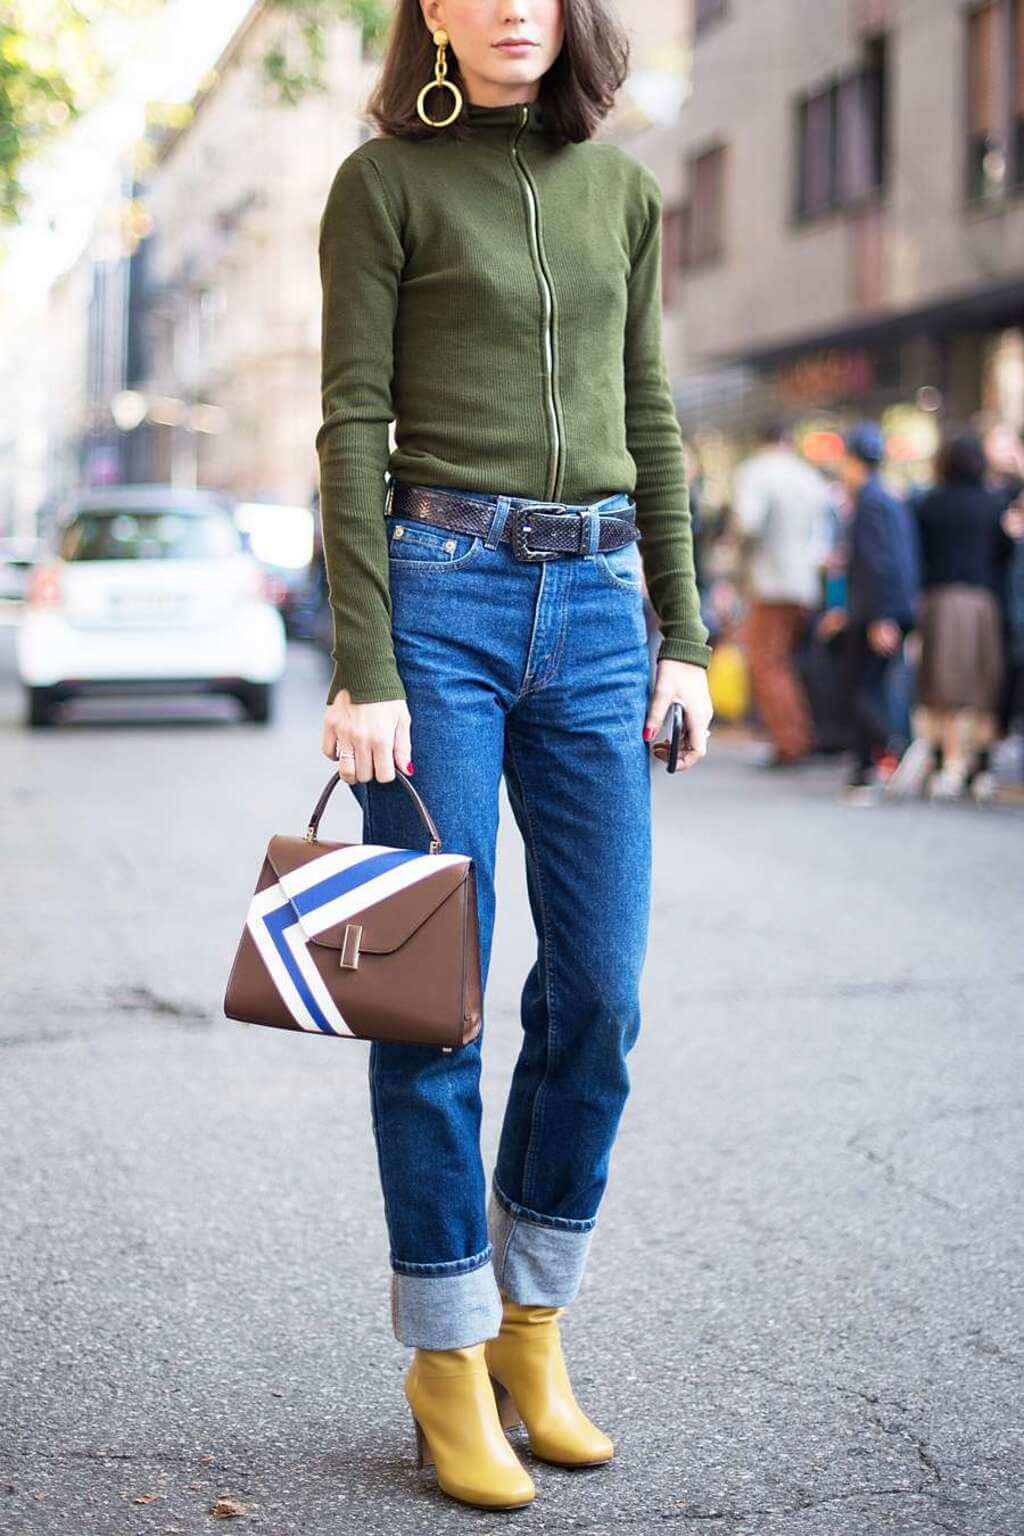 how to wear ankle boots with jeans